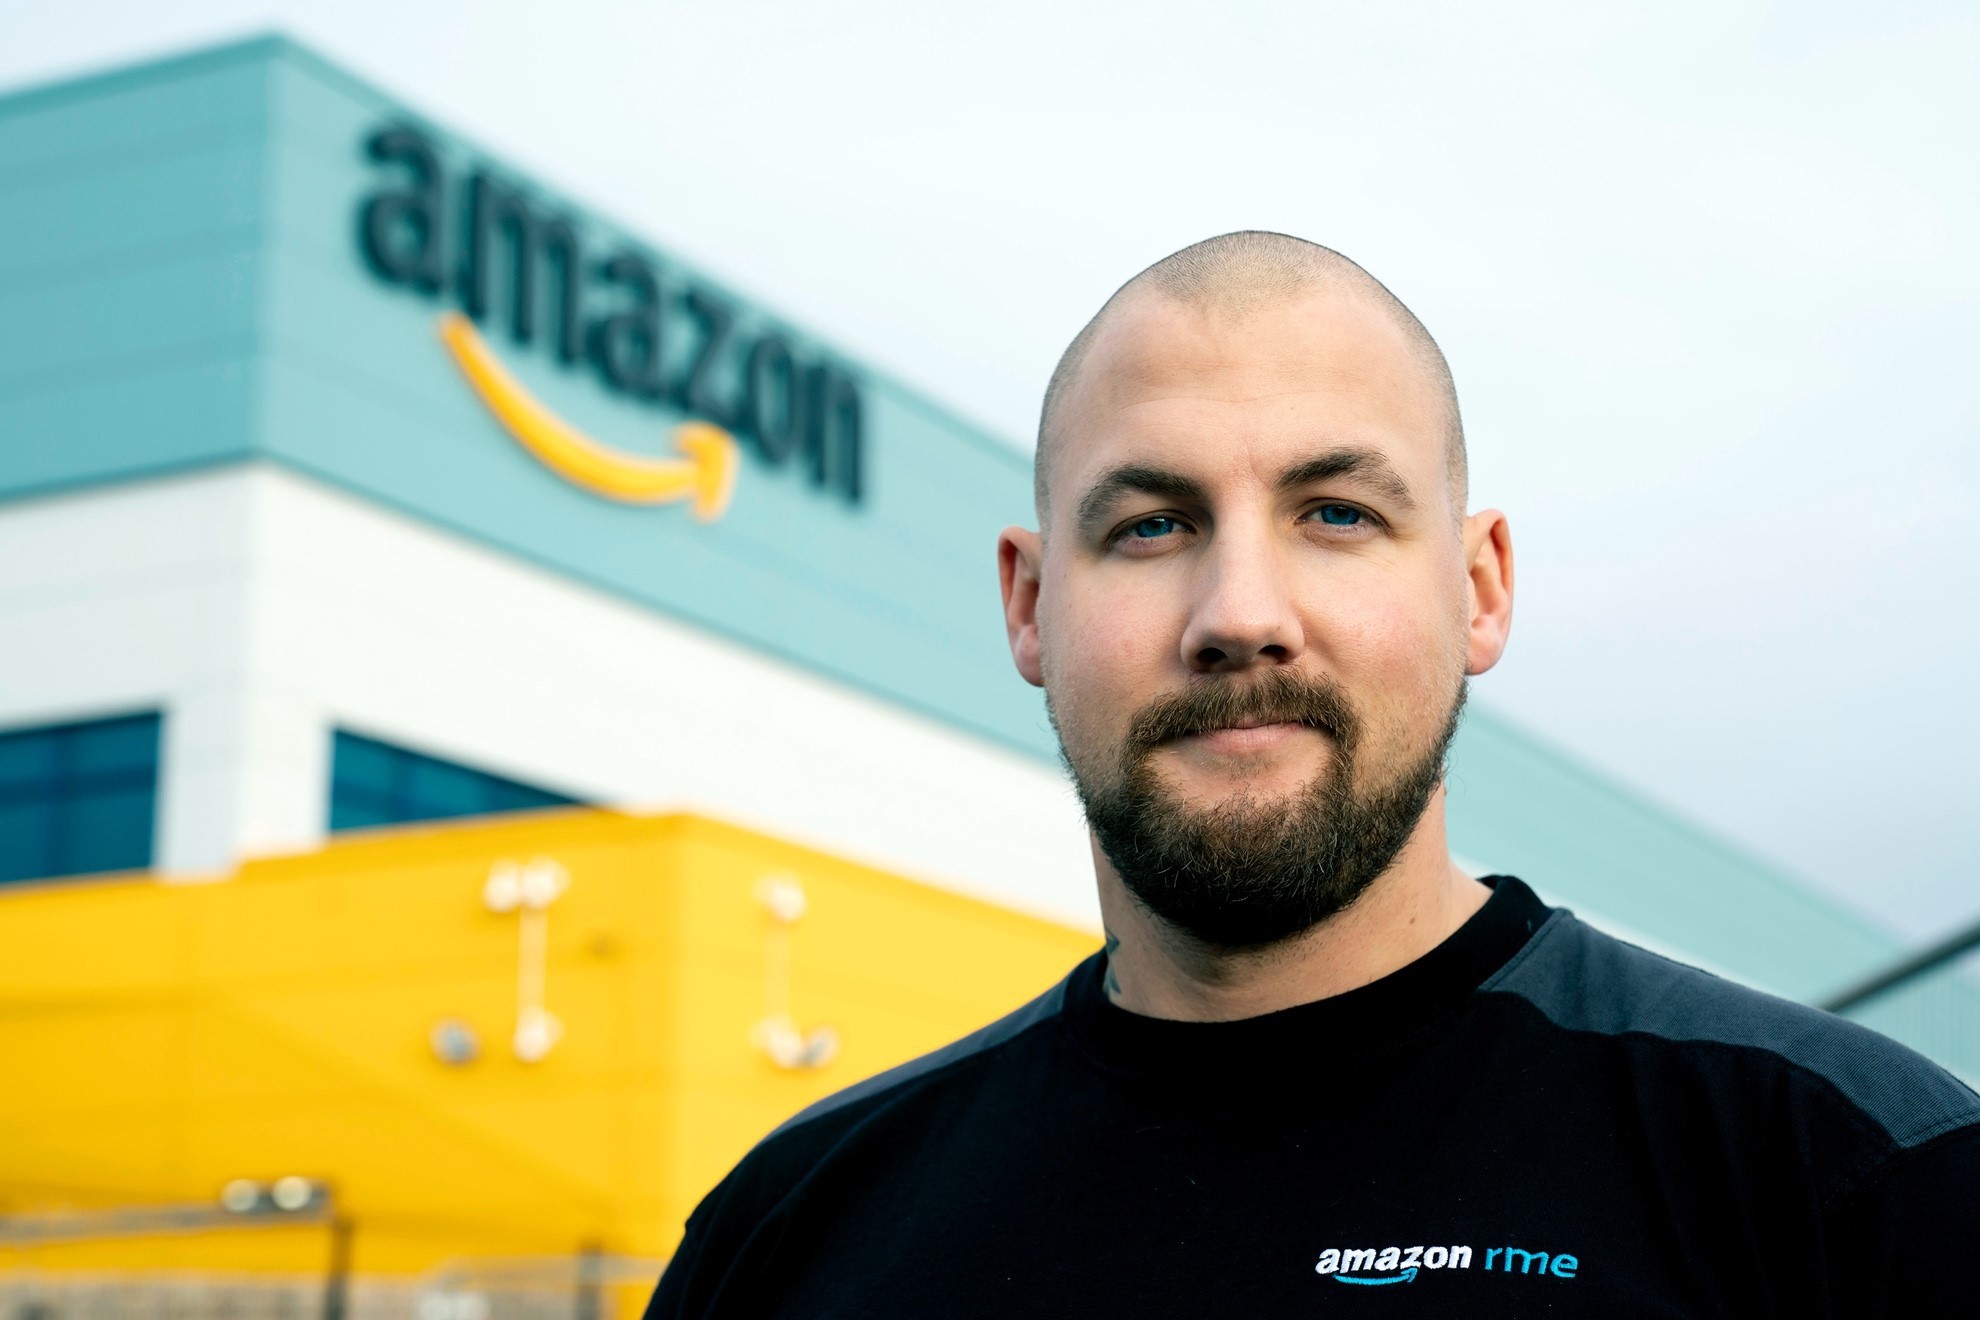 Another Amazon Warrington worker, Mike Radcliffe, came through the scheme